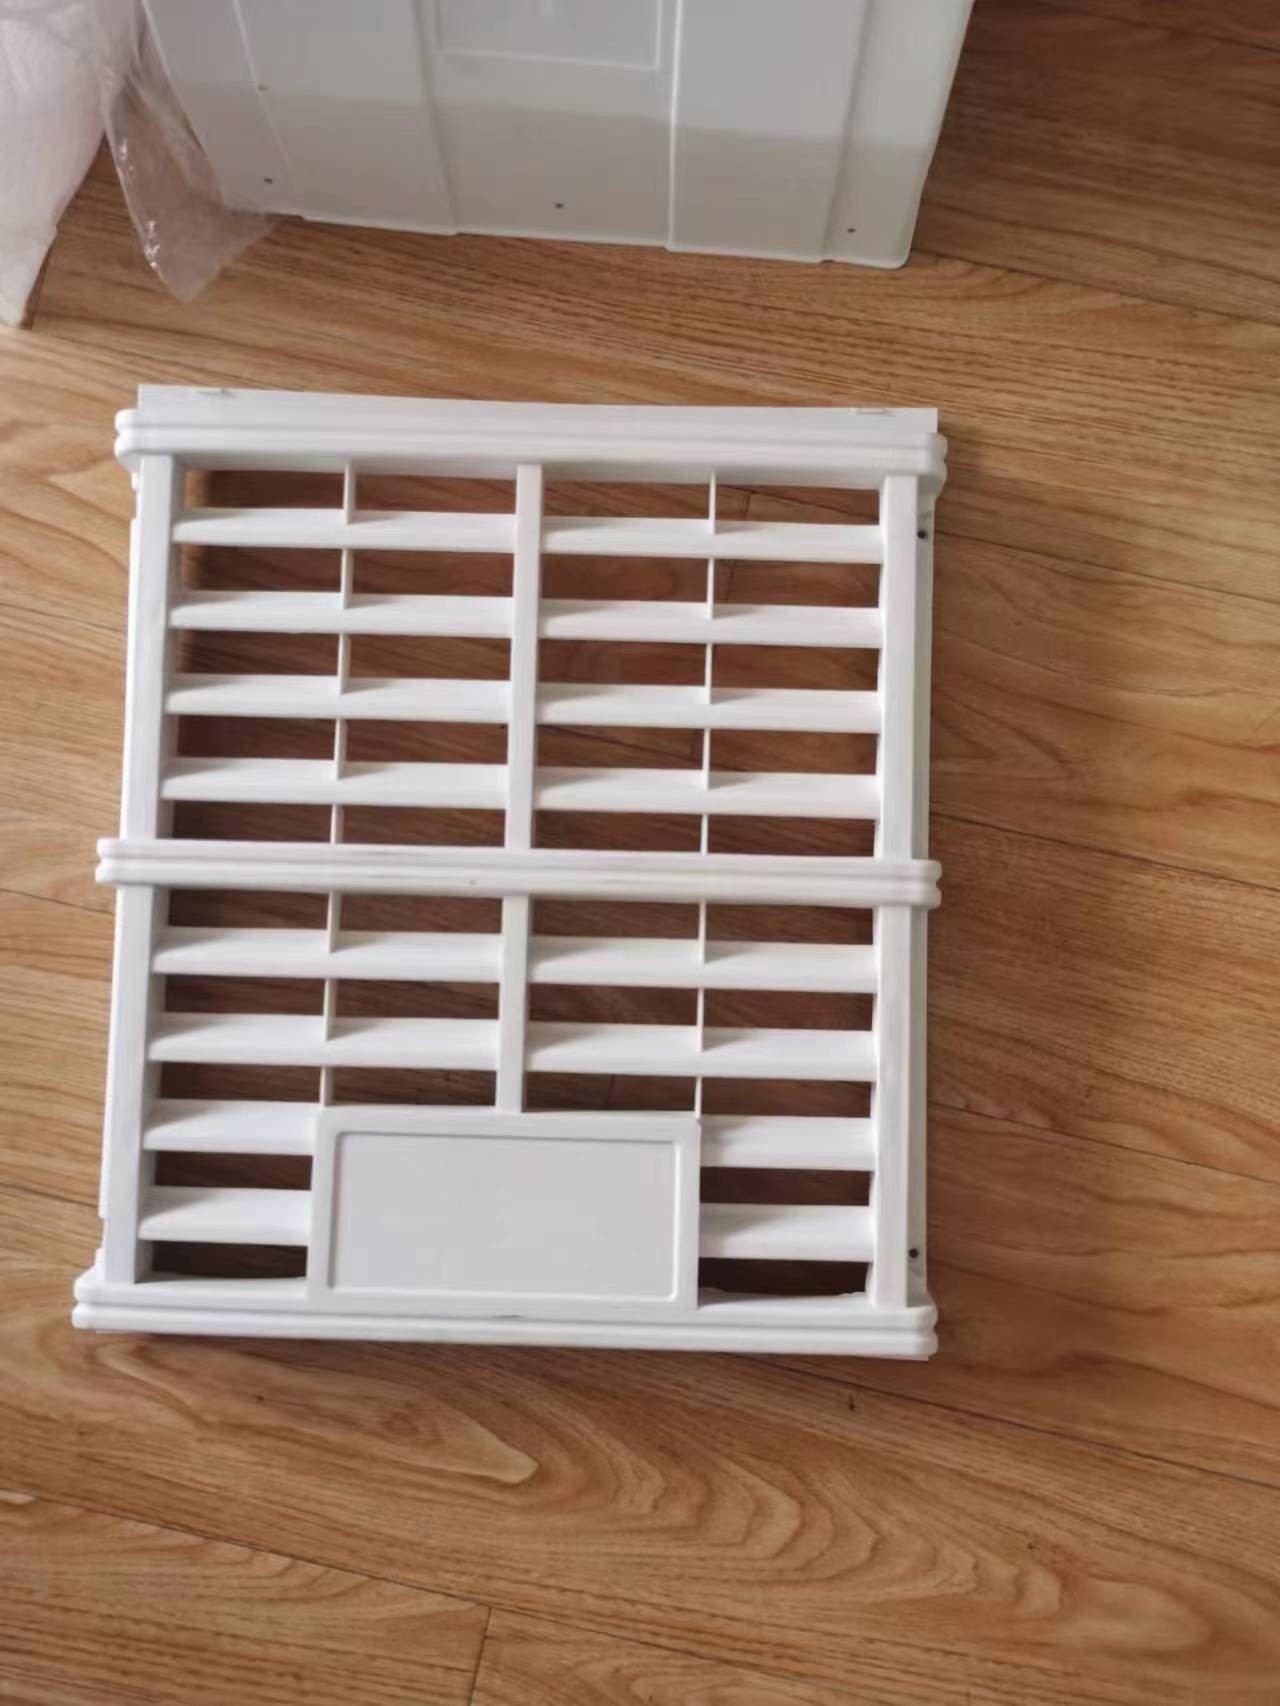 Hot sale in India, Iran, Africa complete solution for Plastic industrial air cooler injection mold cooler grill mold